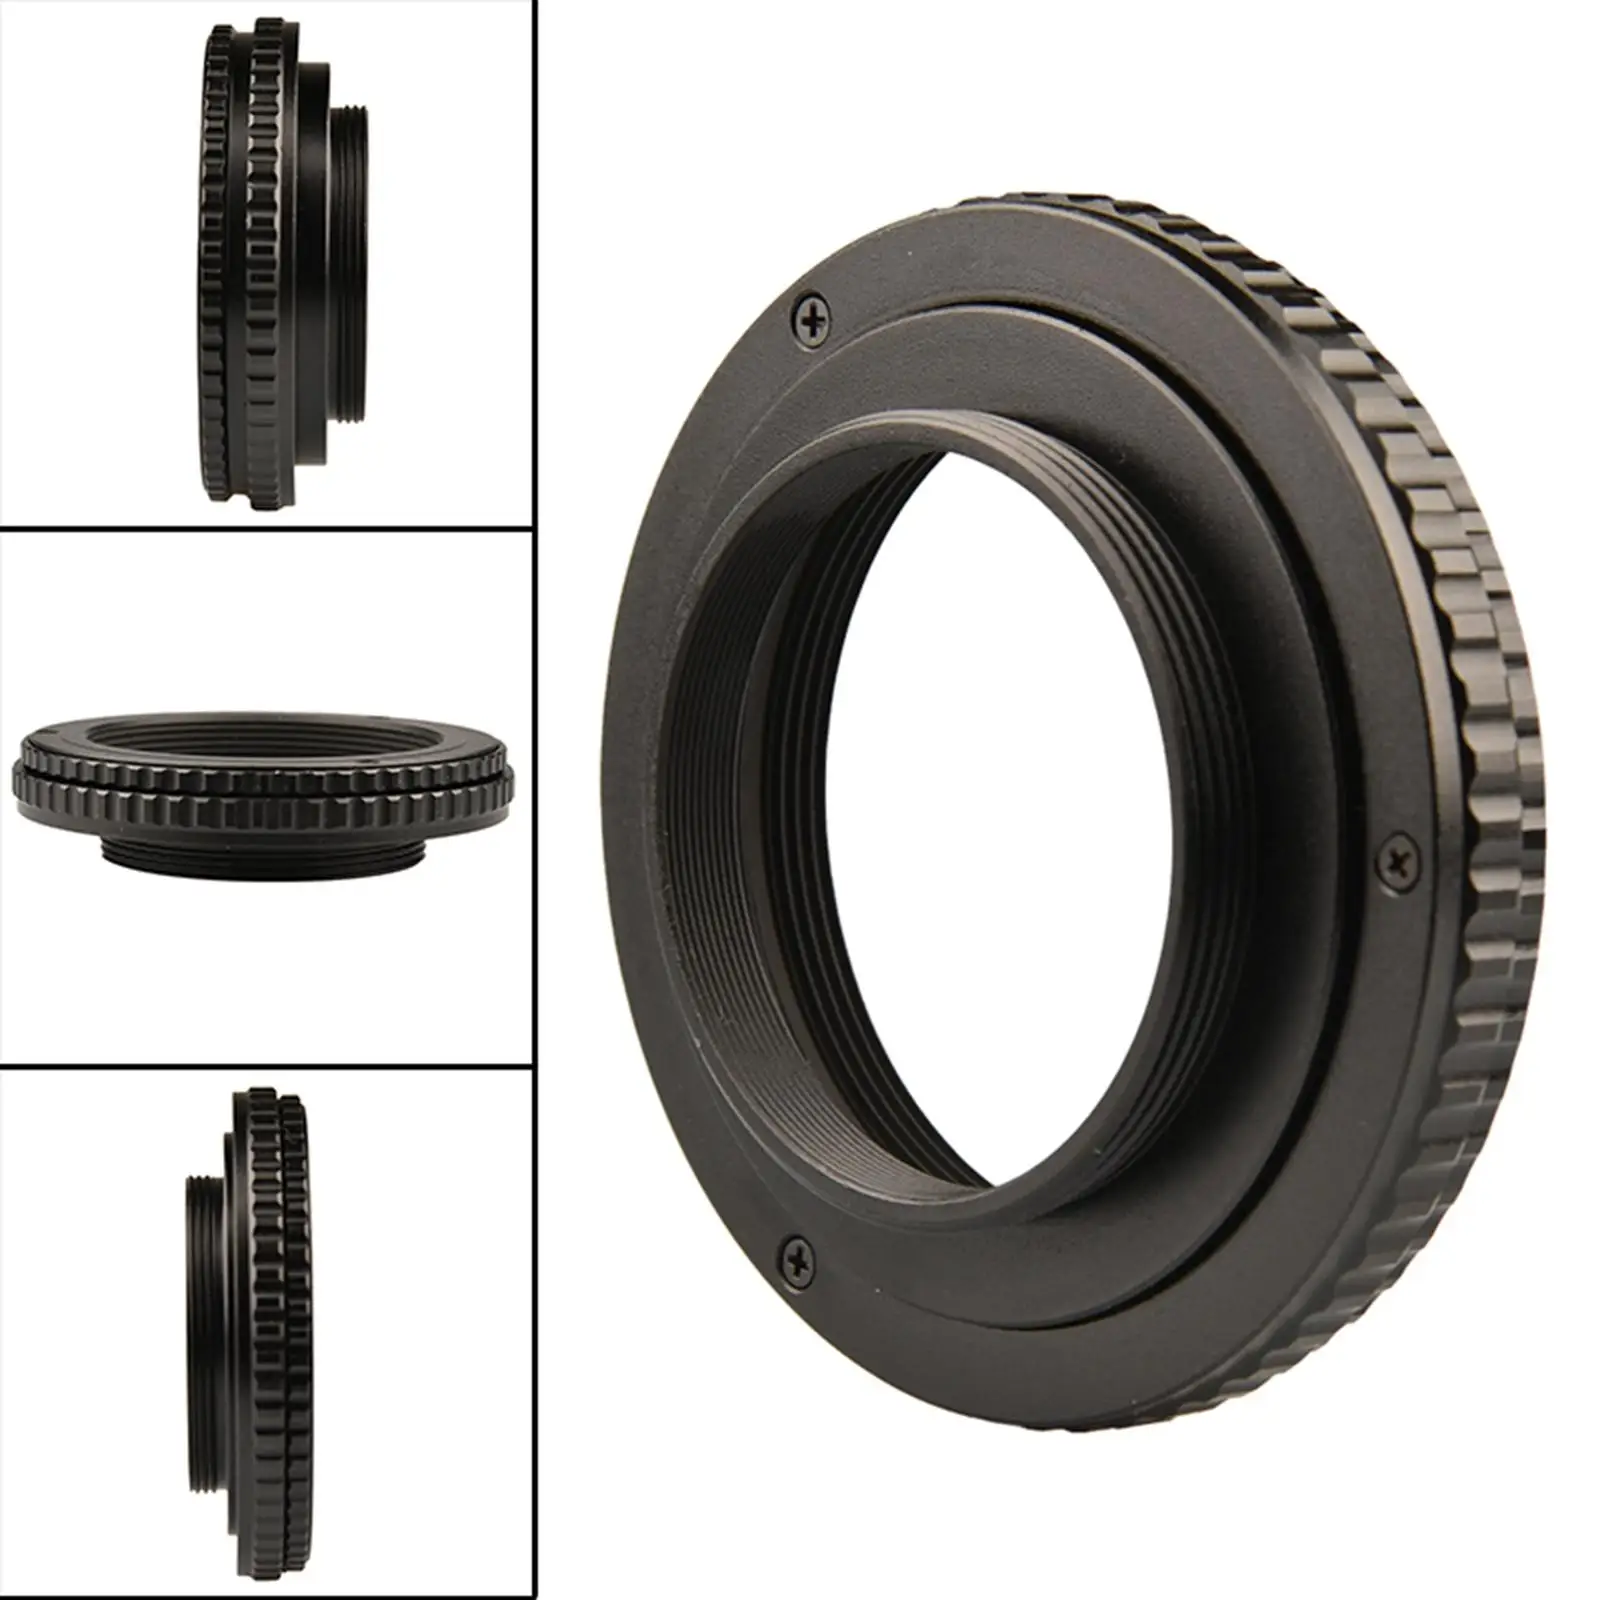 Macro Extension Tube Adapter Ring M39 x 1mm Male to M42 x 1mm Female Adjustable Focusing Screw Mount for Digital Slr Cameras